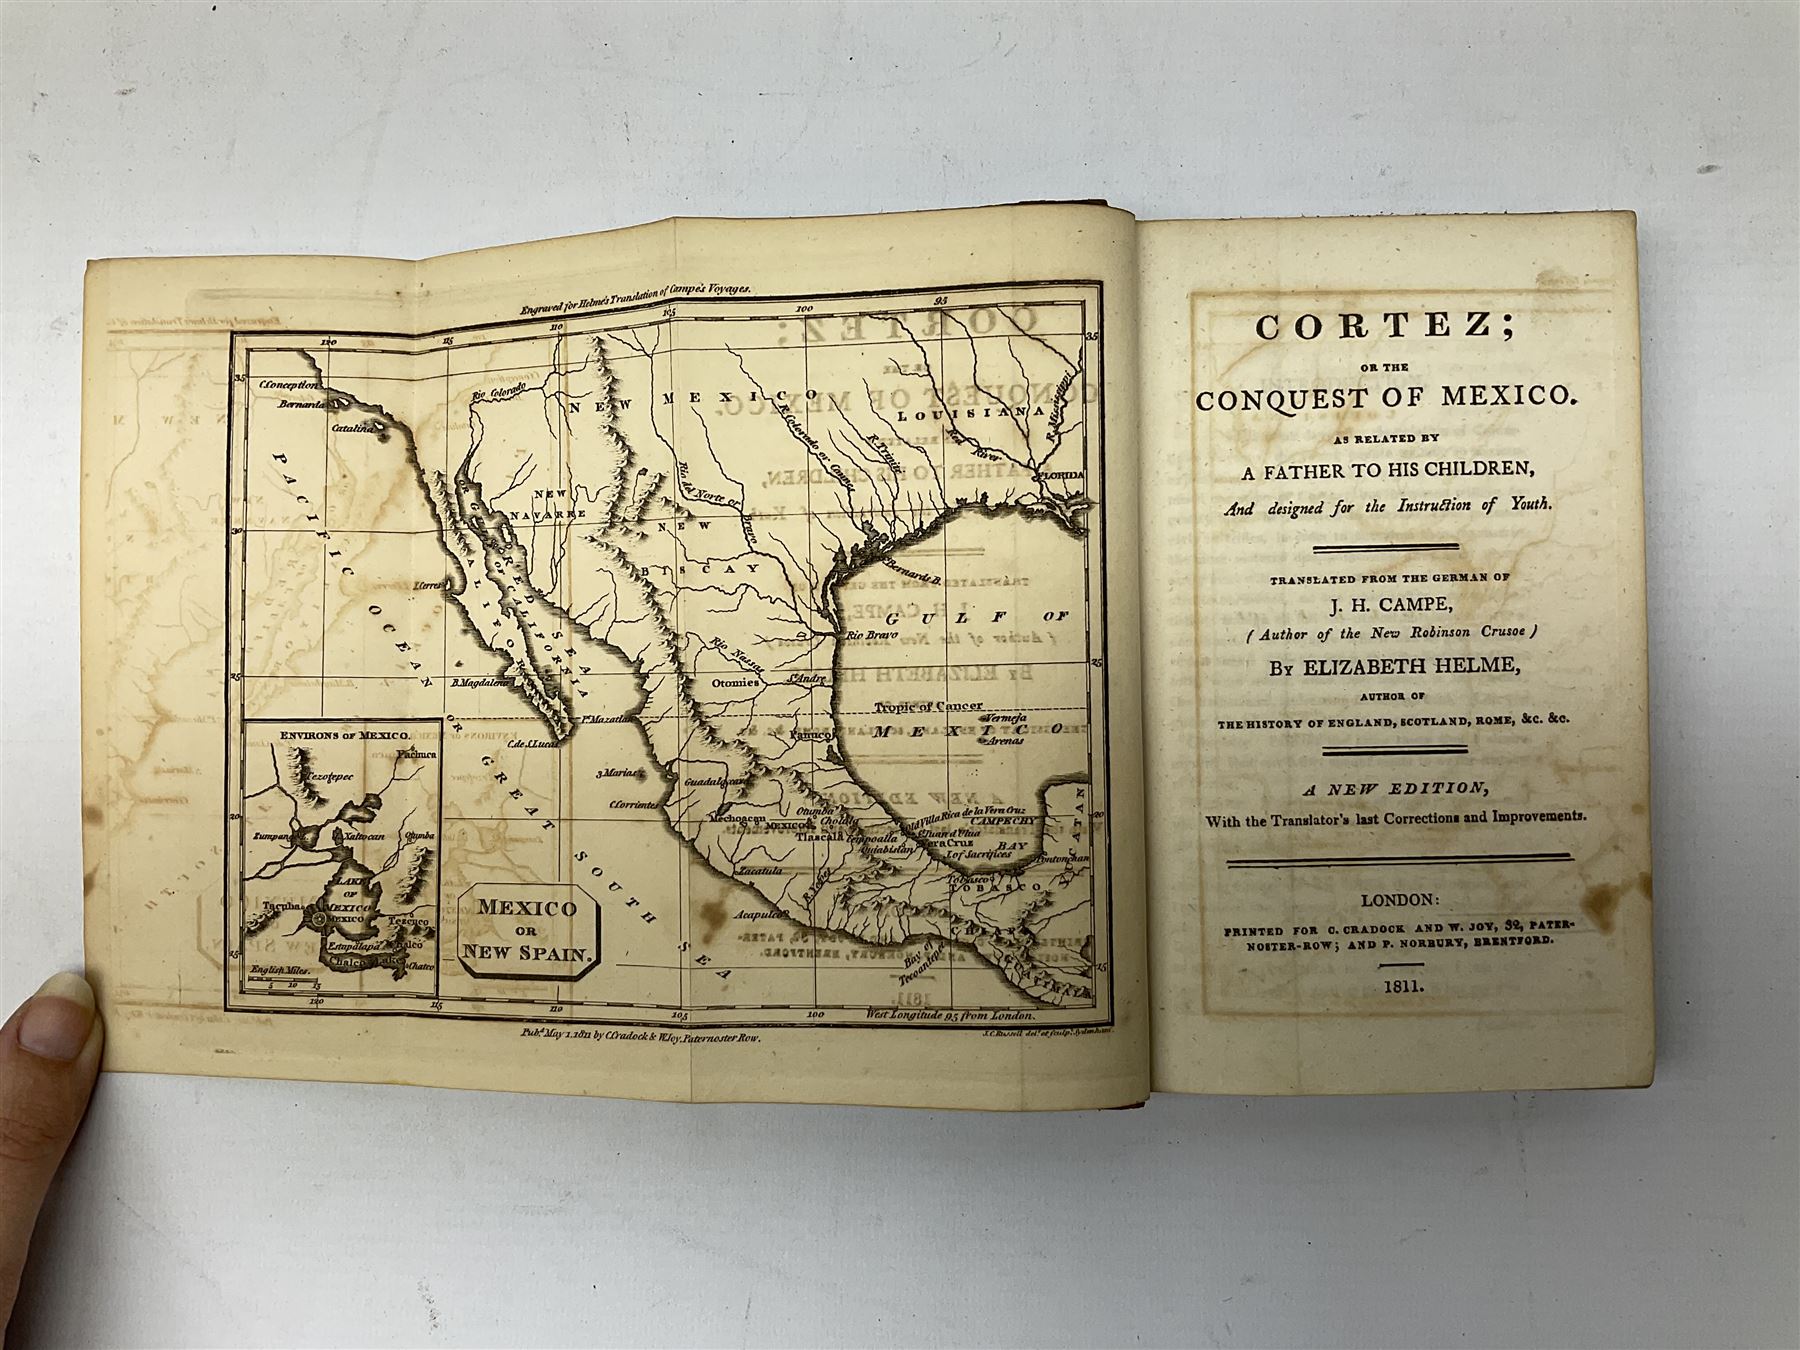 Swinburne Henry: Travels Through Spain in the years 1775 and 1776. 1787 London. Two volumes. Folding - Image 14 of 17